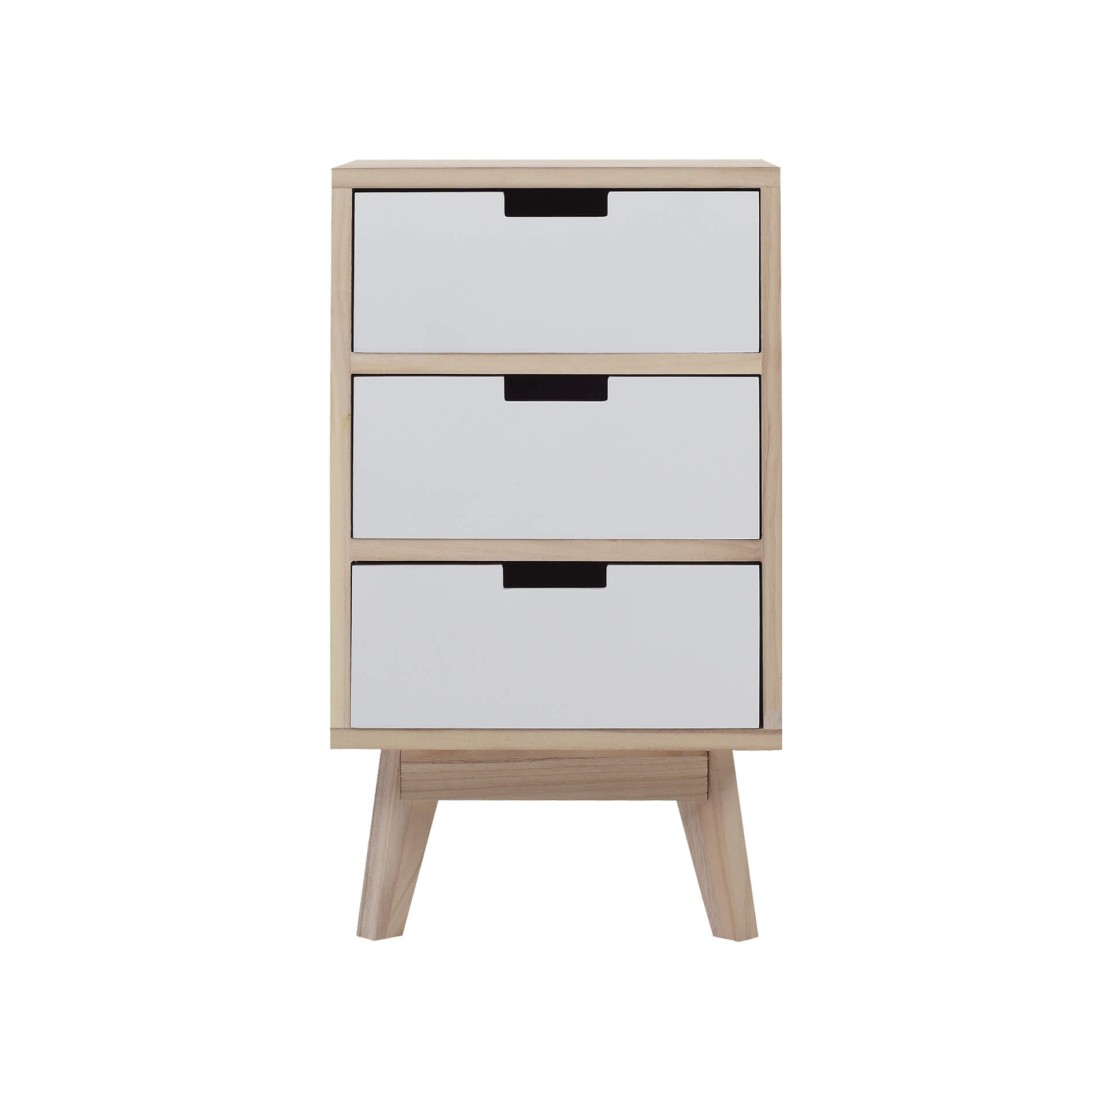 Small Scandinavian style chest of drawers with 3 drawers